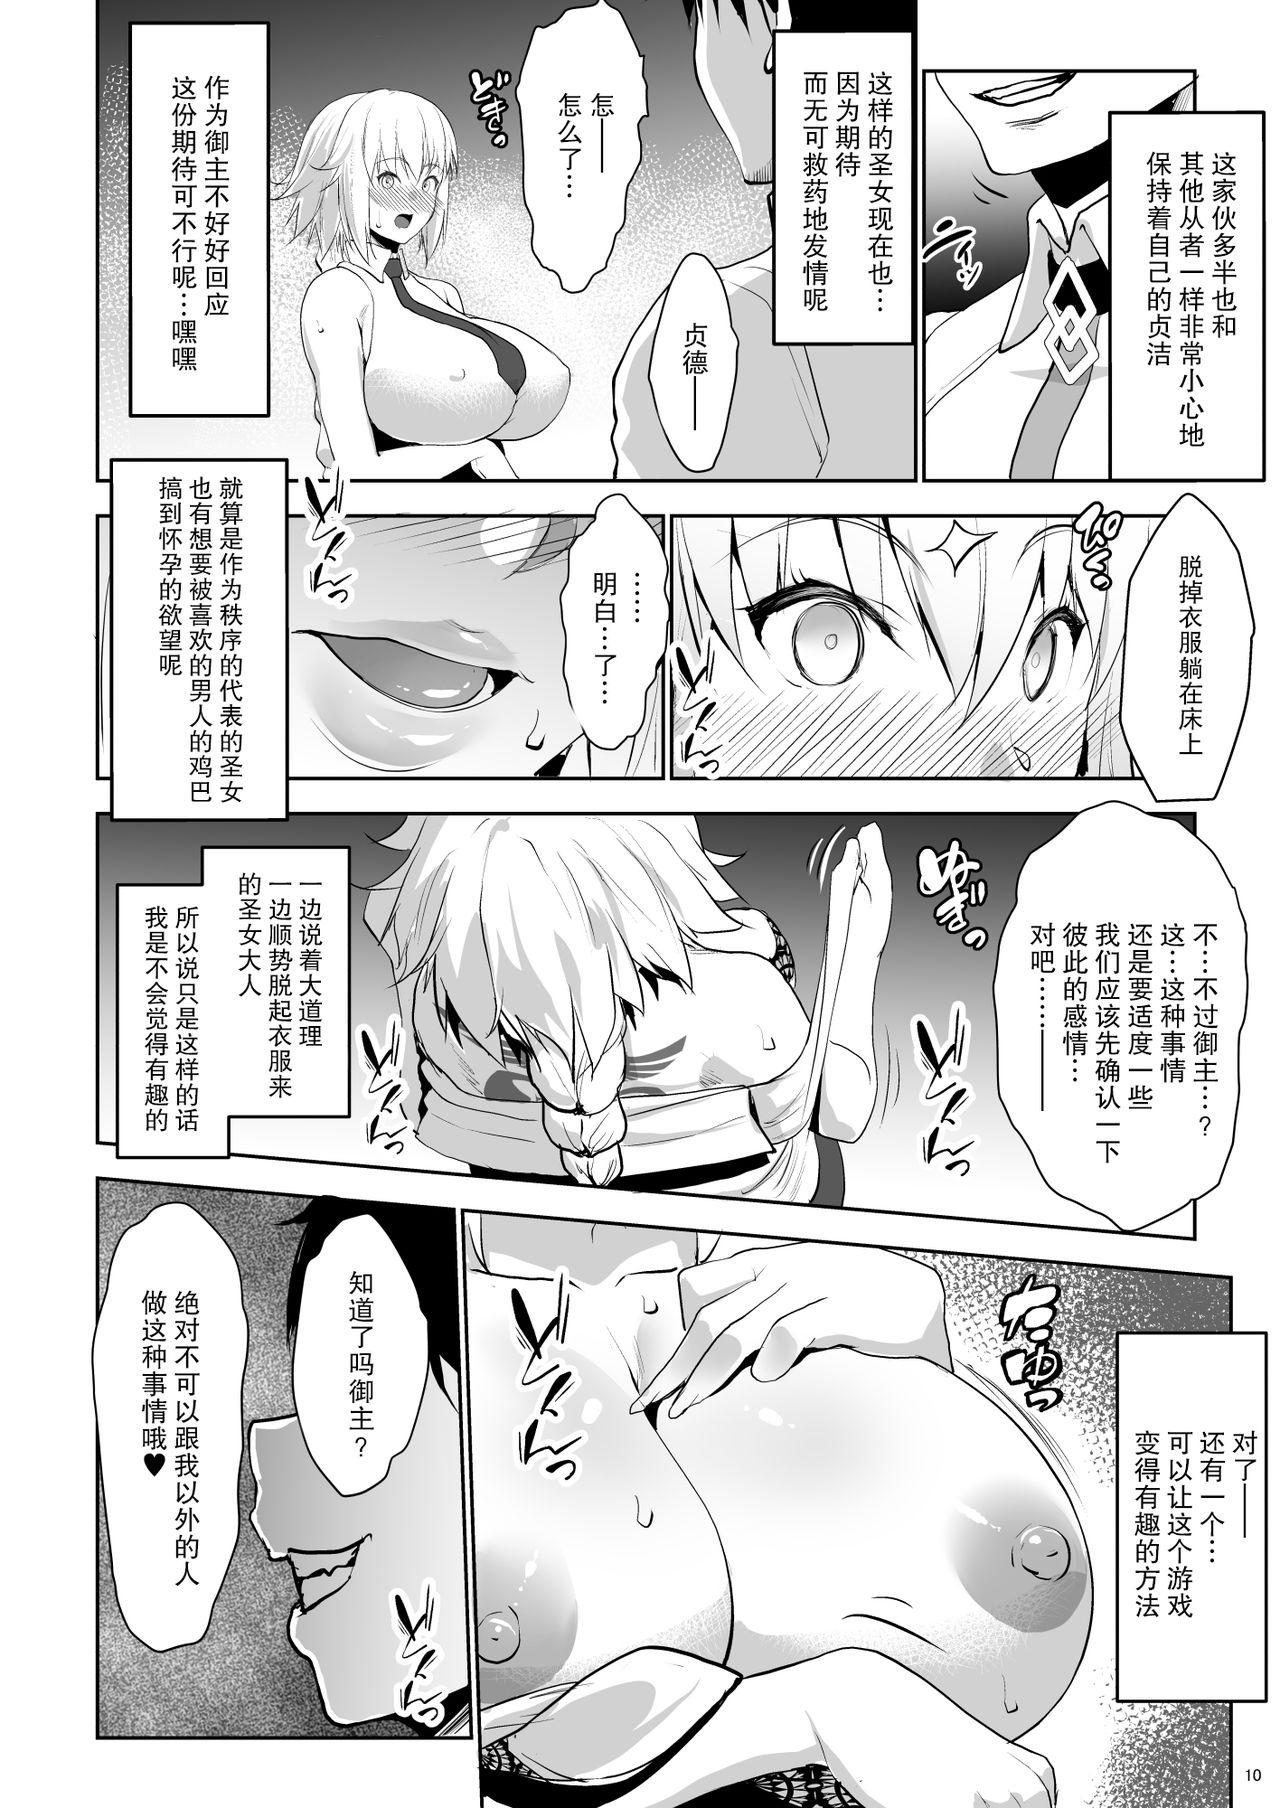 Peituda Sapohame Jeanne - Fate grand order Cocksuckers - Page 10